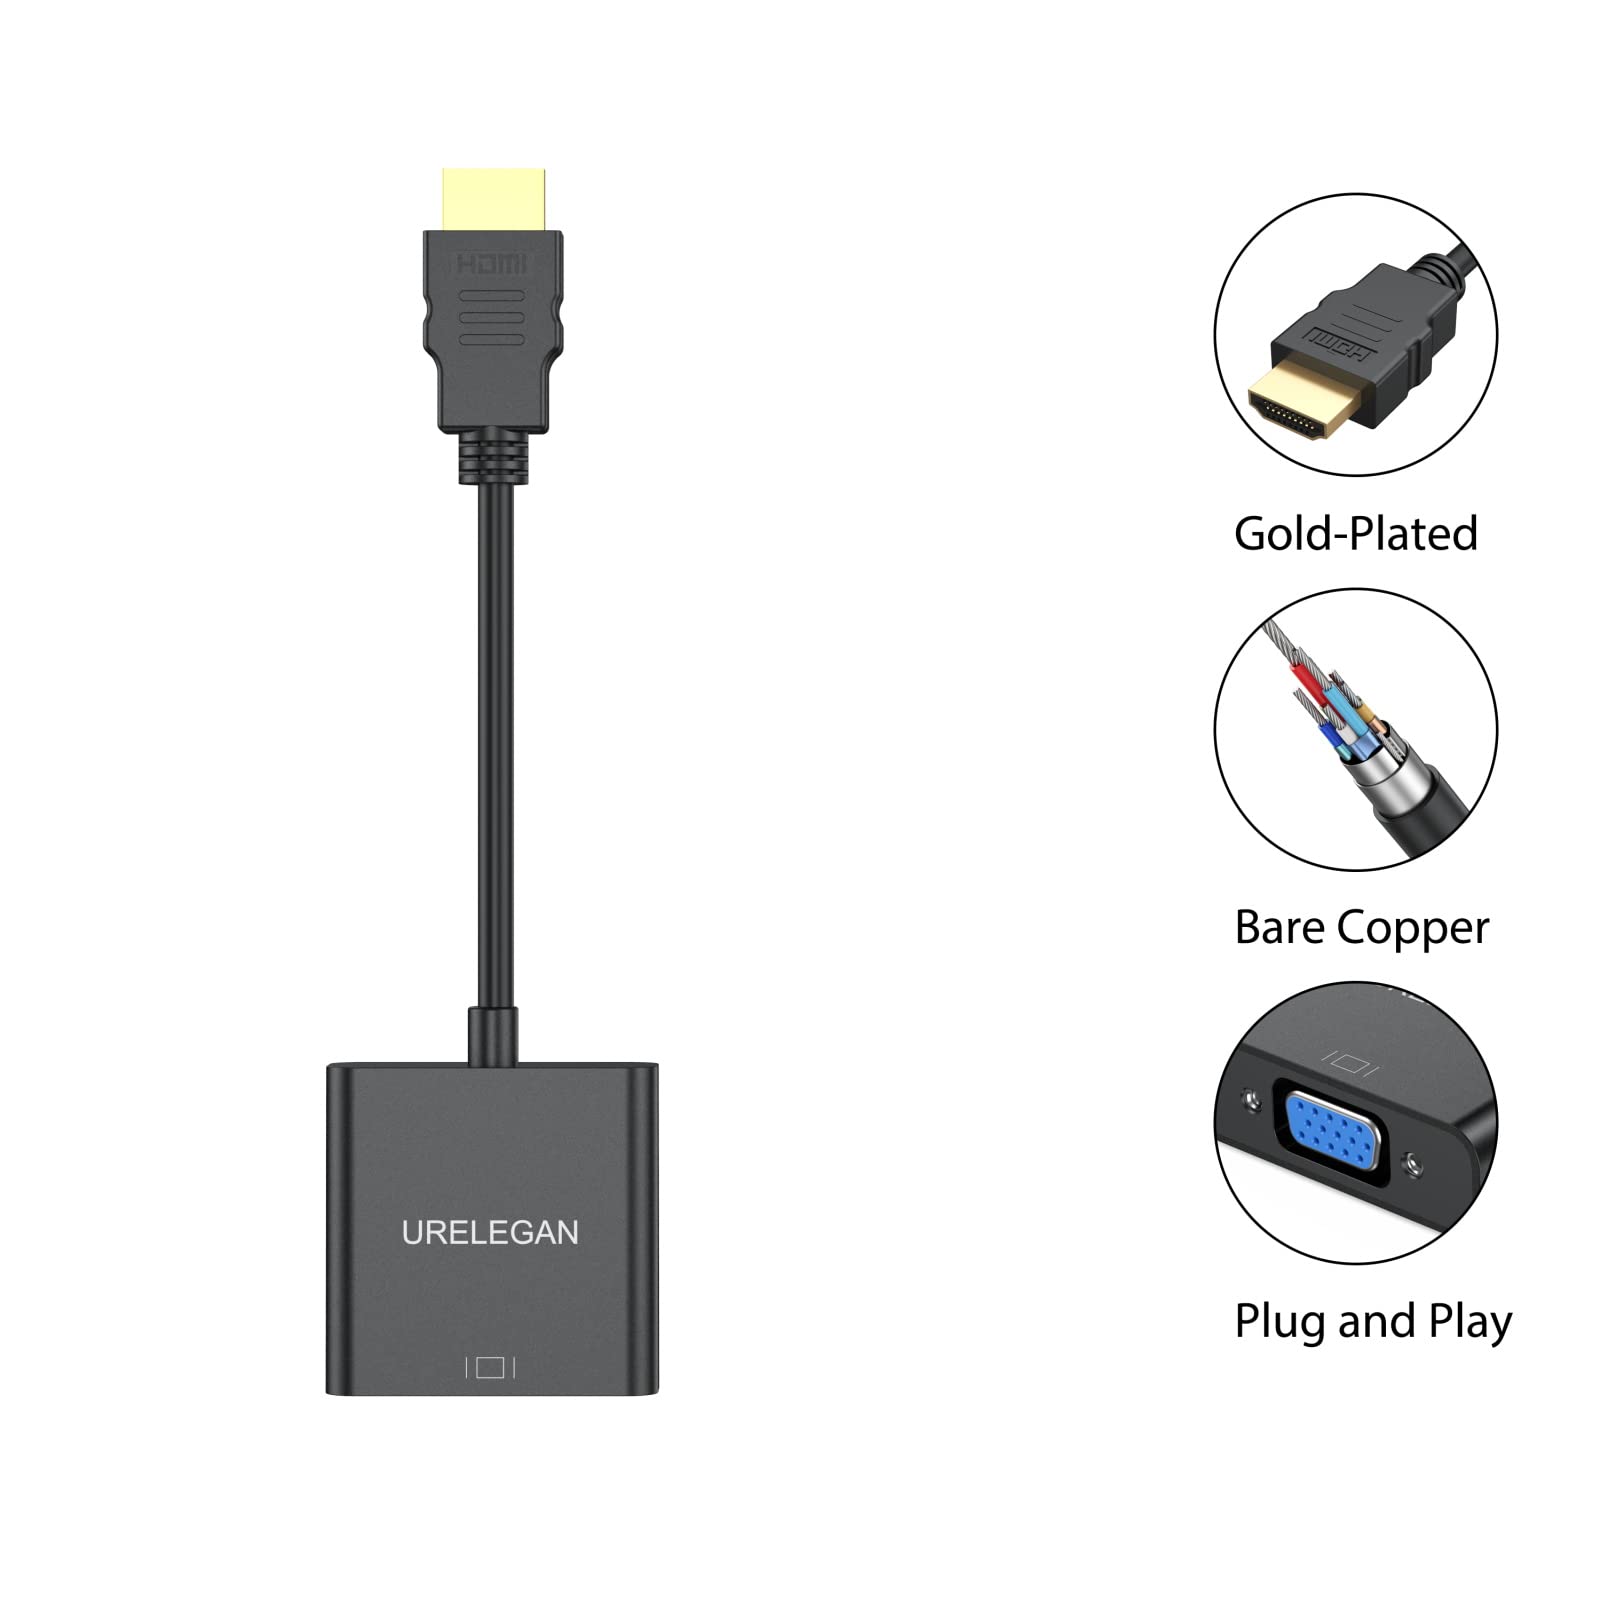 HDMI to VGA Adapter 10-Pack, HDMI to VGA (Male to Female) 1080P Converter for Computer, Desktop, Laptop, PC, Monitor, Projector, HDTV, Chromebook, Raspberry Pi, Roku, Xbox and More